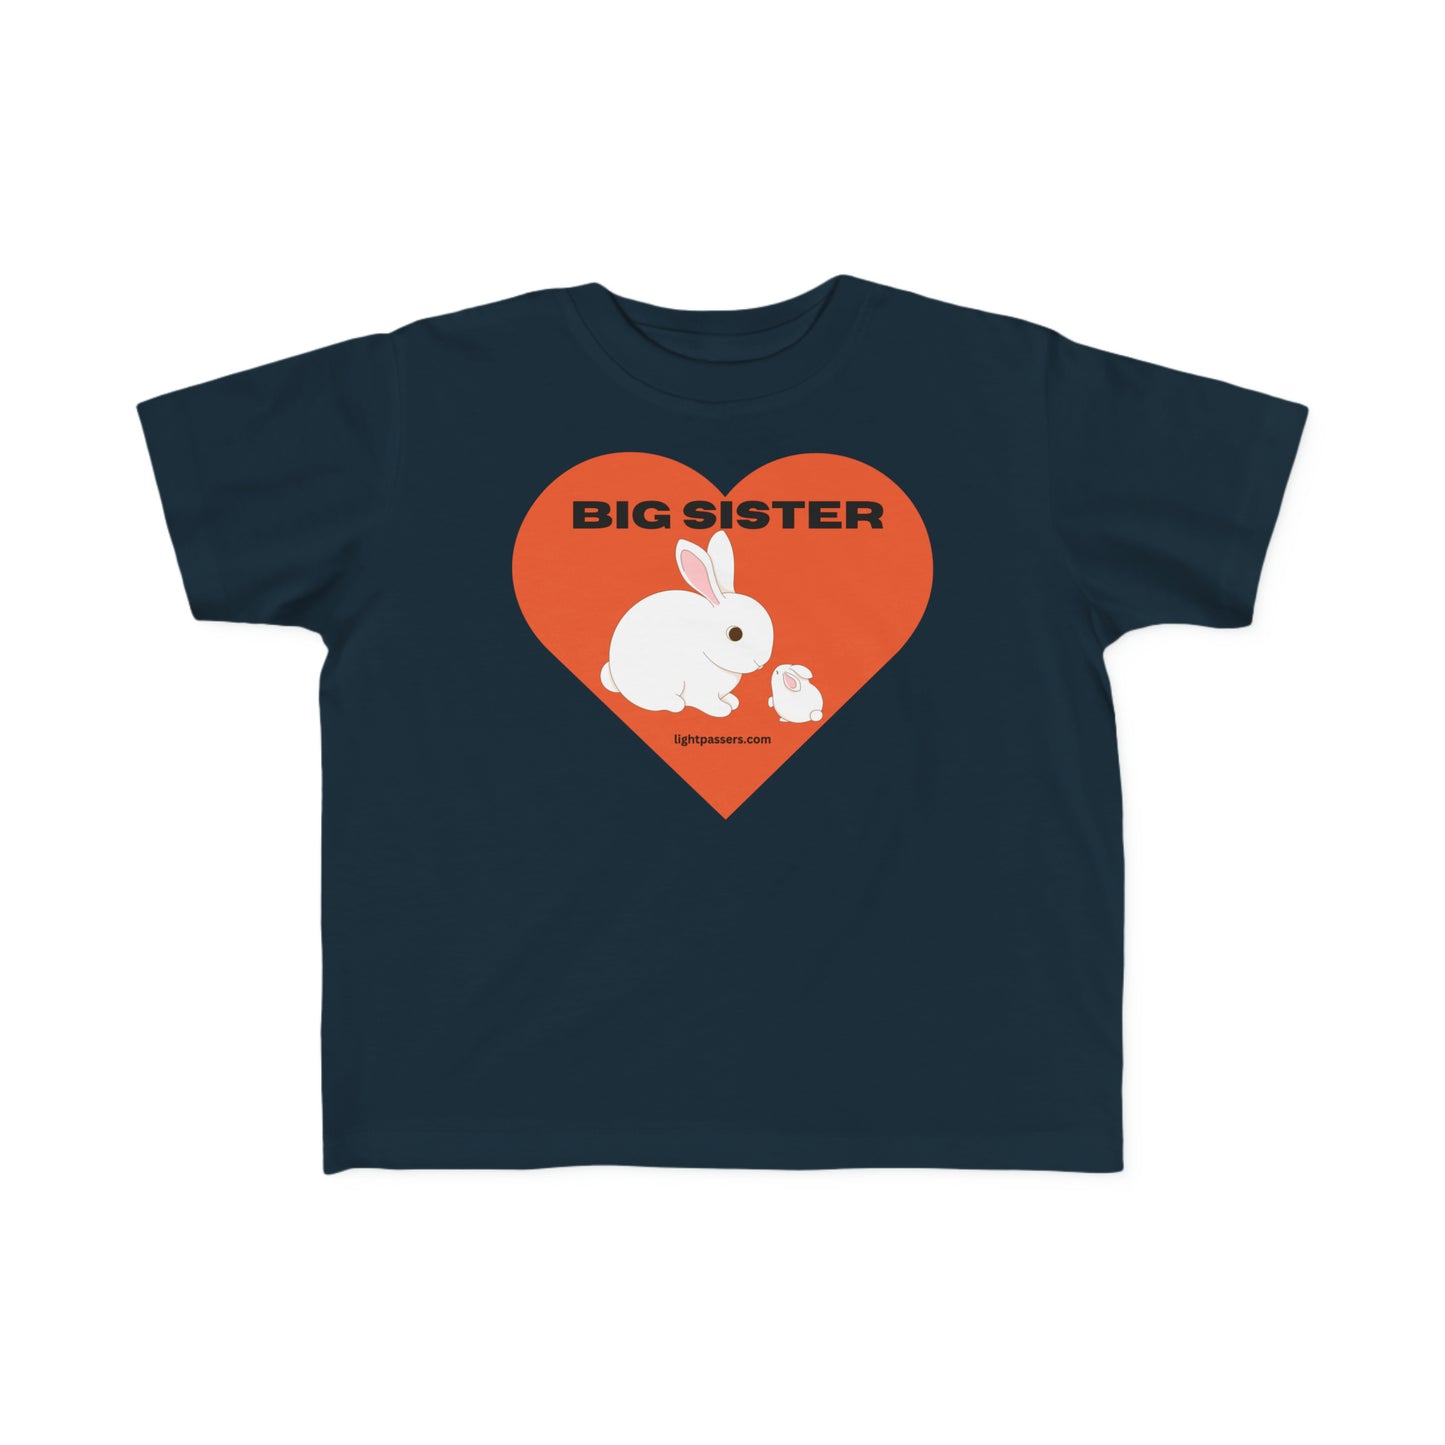 Light Passers Marketplace "Big Sister: with white bunnies and Orange heart Toddler Fine Jersey T-shirt Simple Messages